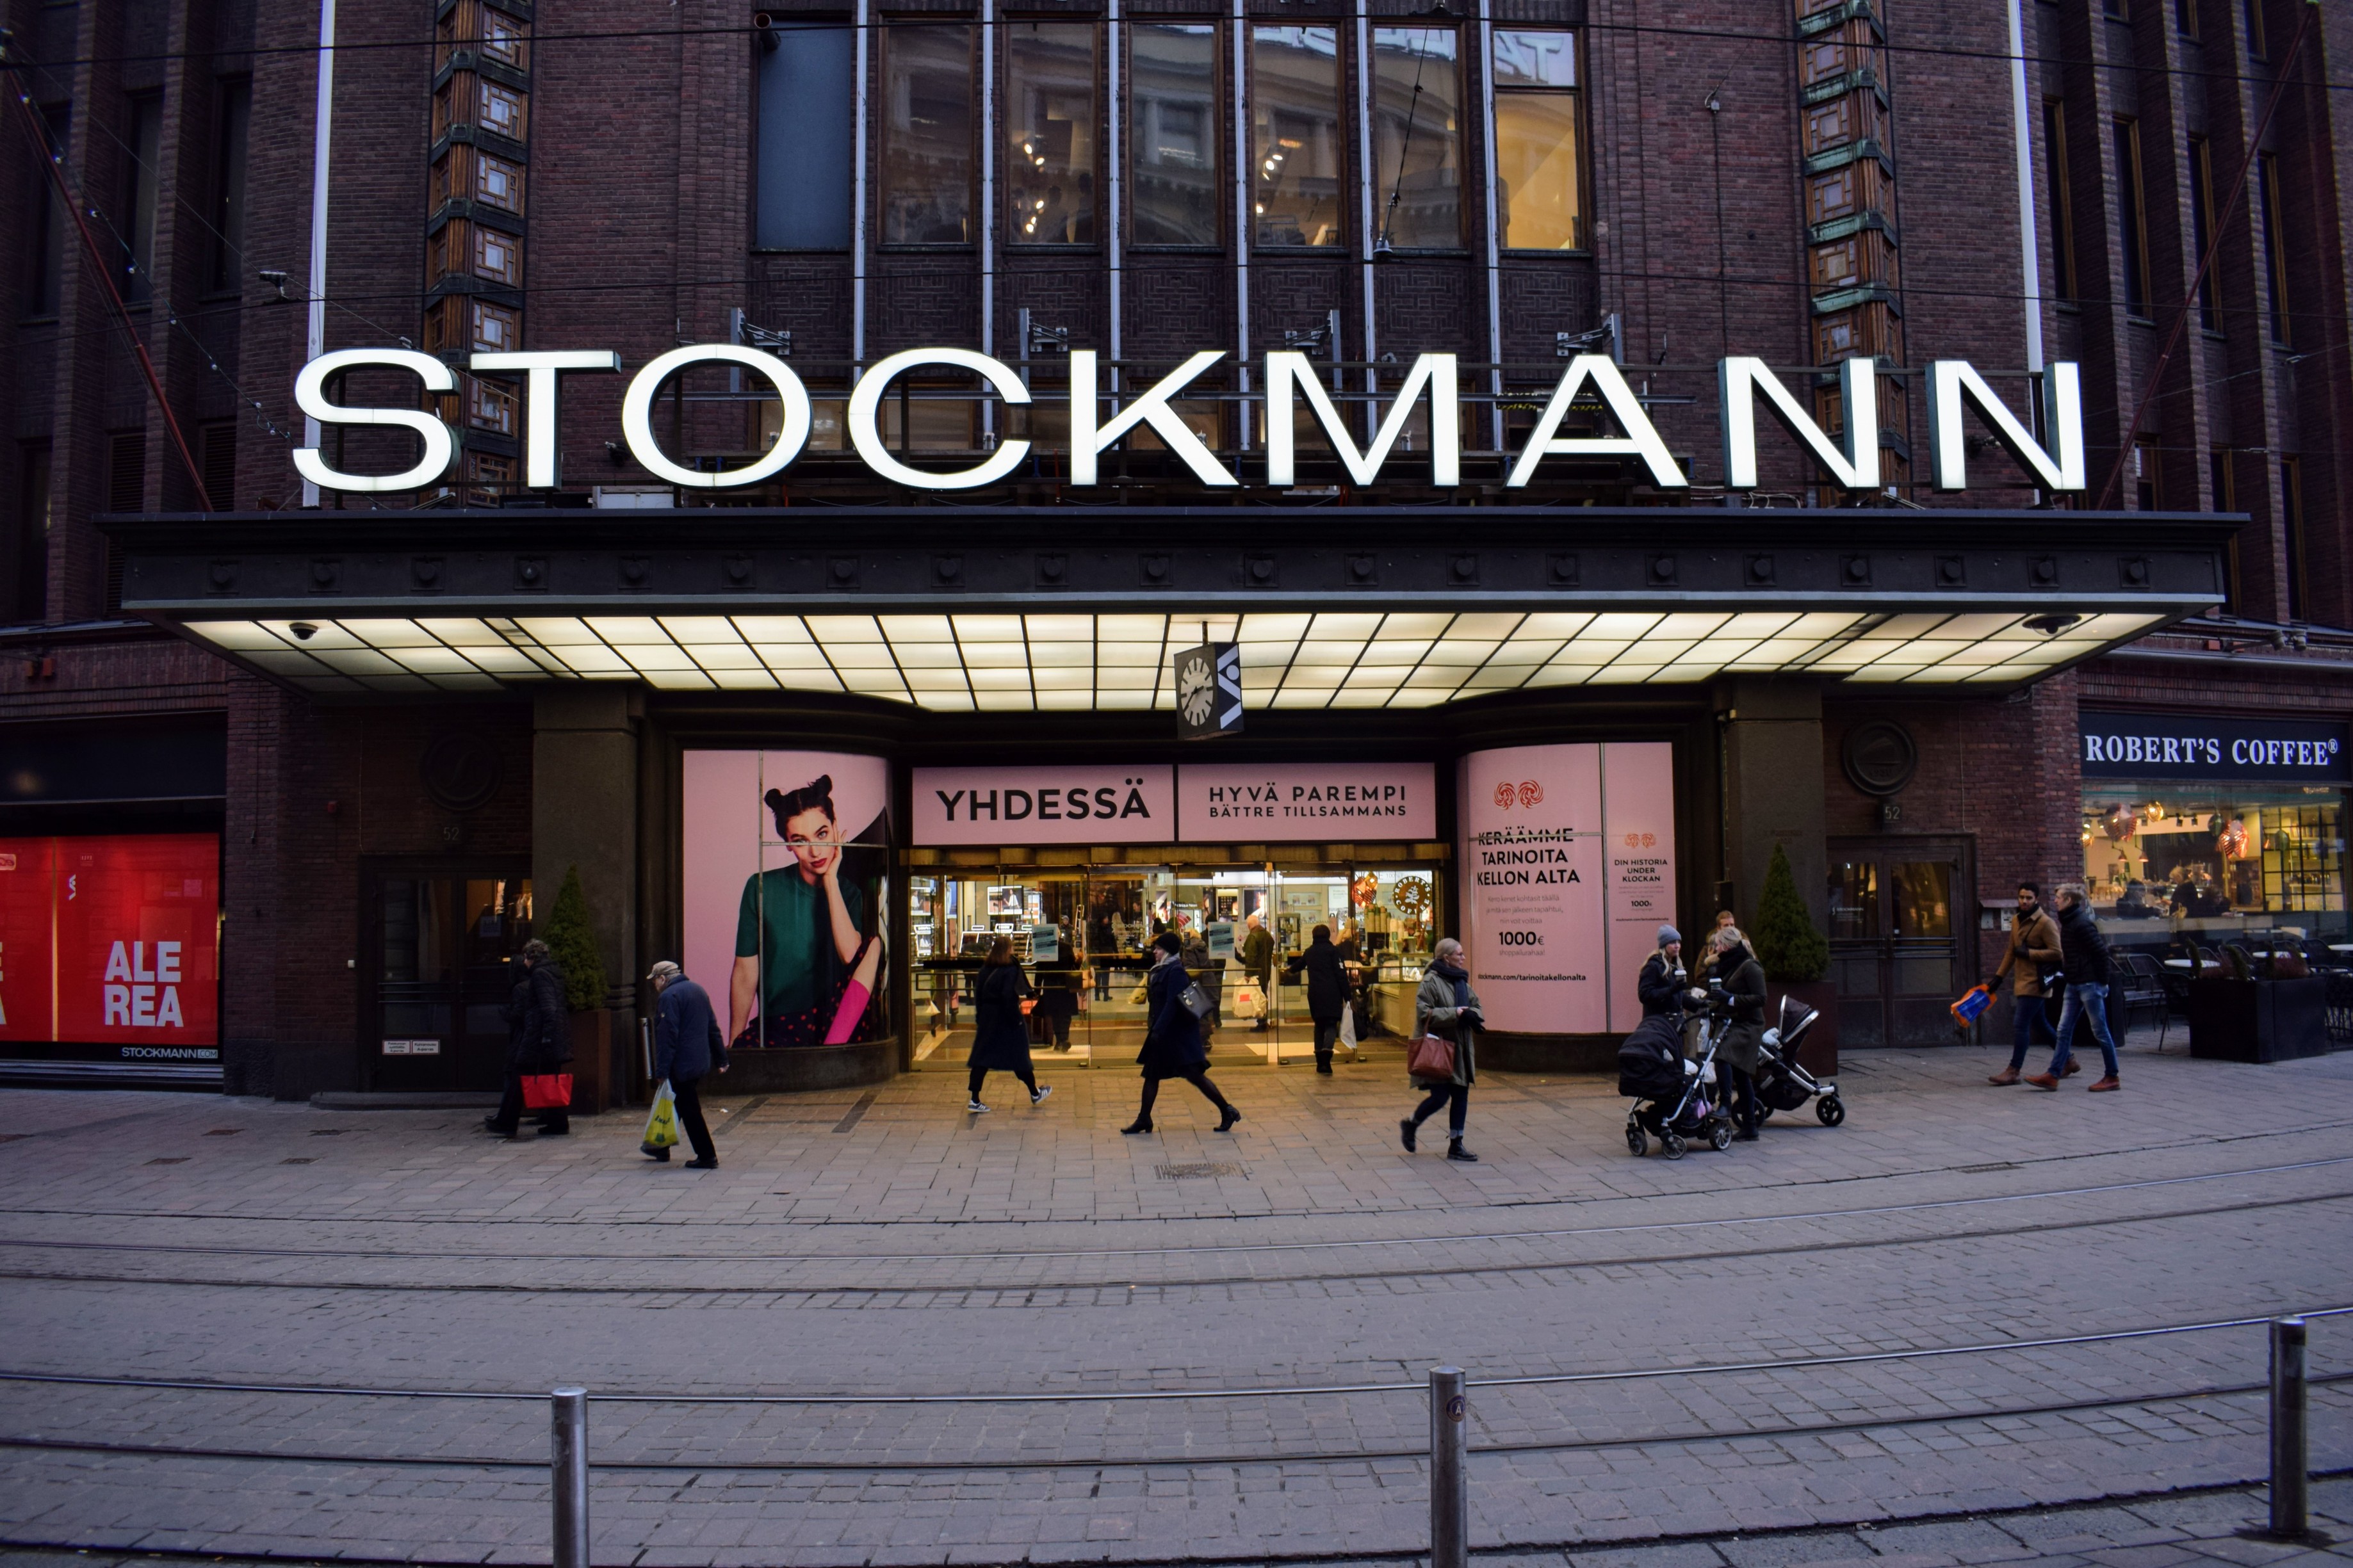 Stockmann sold the Helsinki flagship department store